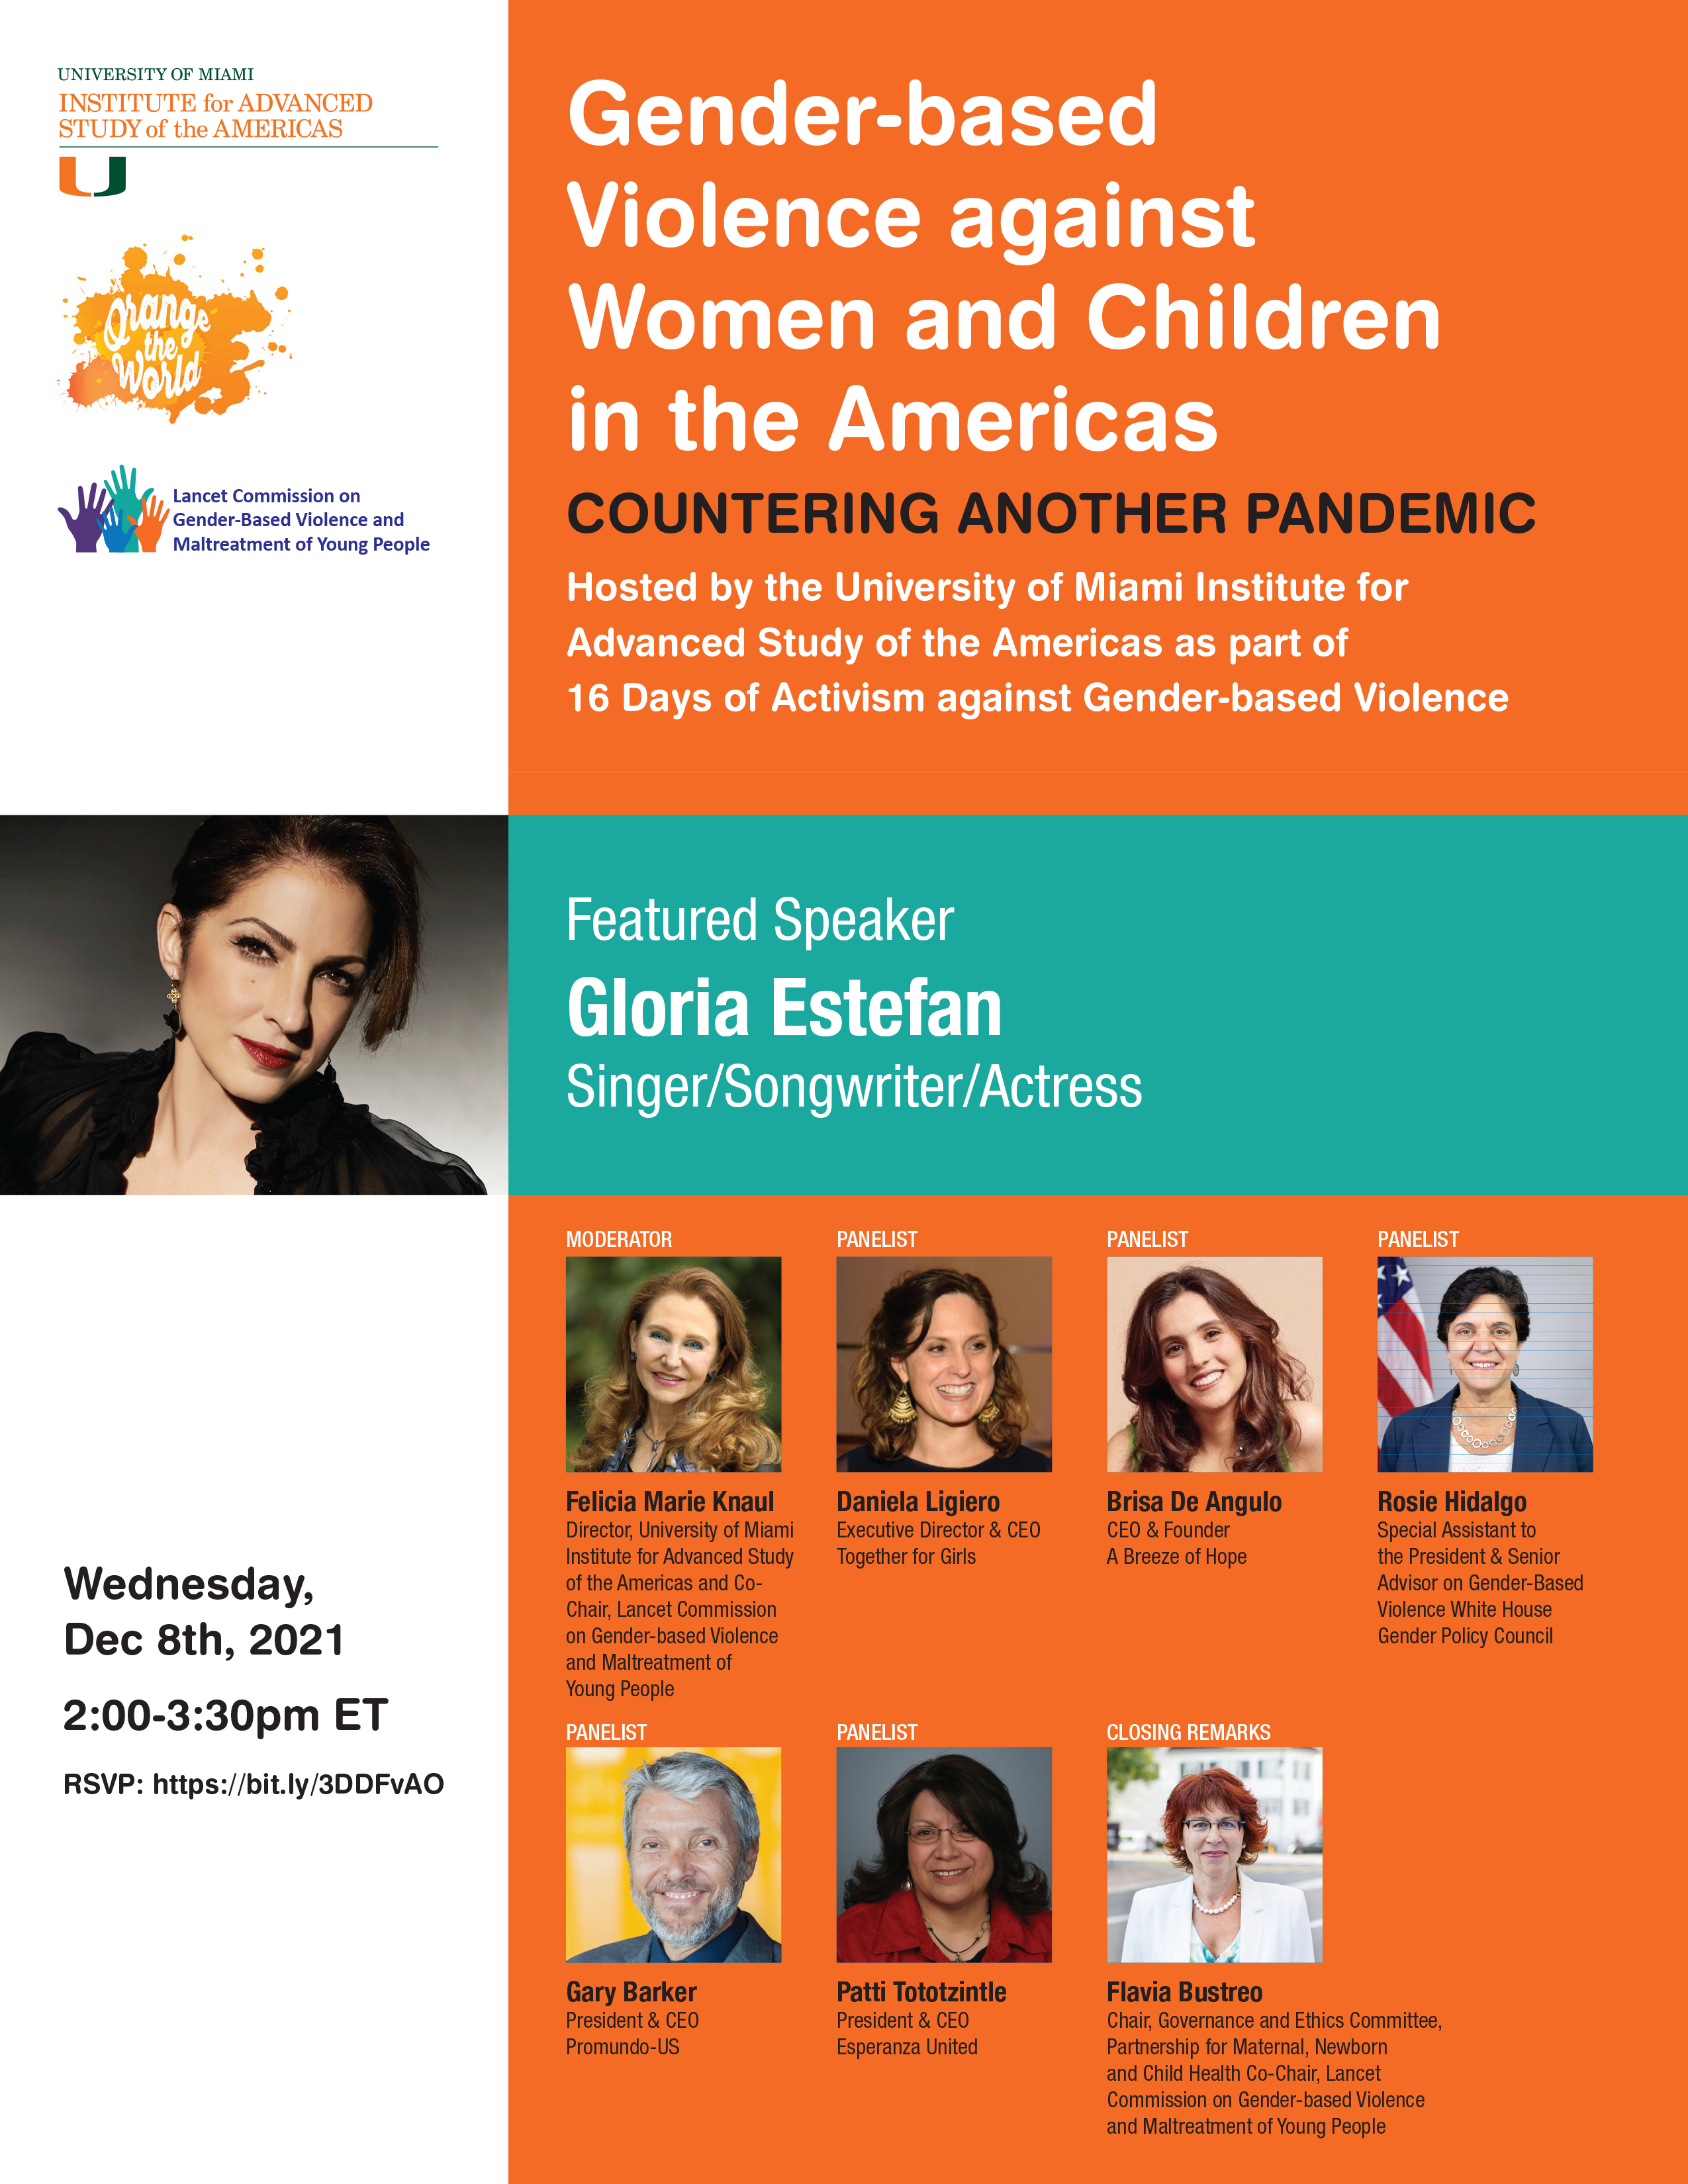 Gender-based Violence Against Women and Children in the Americas: Countering Another Pandemic